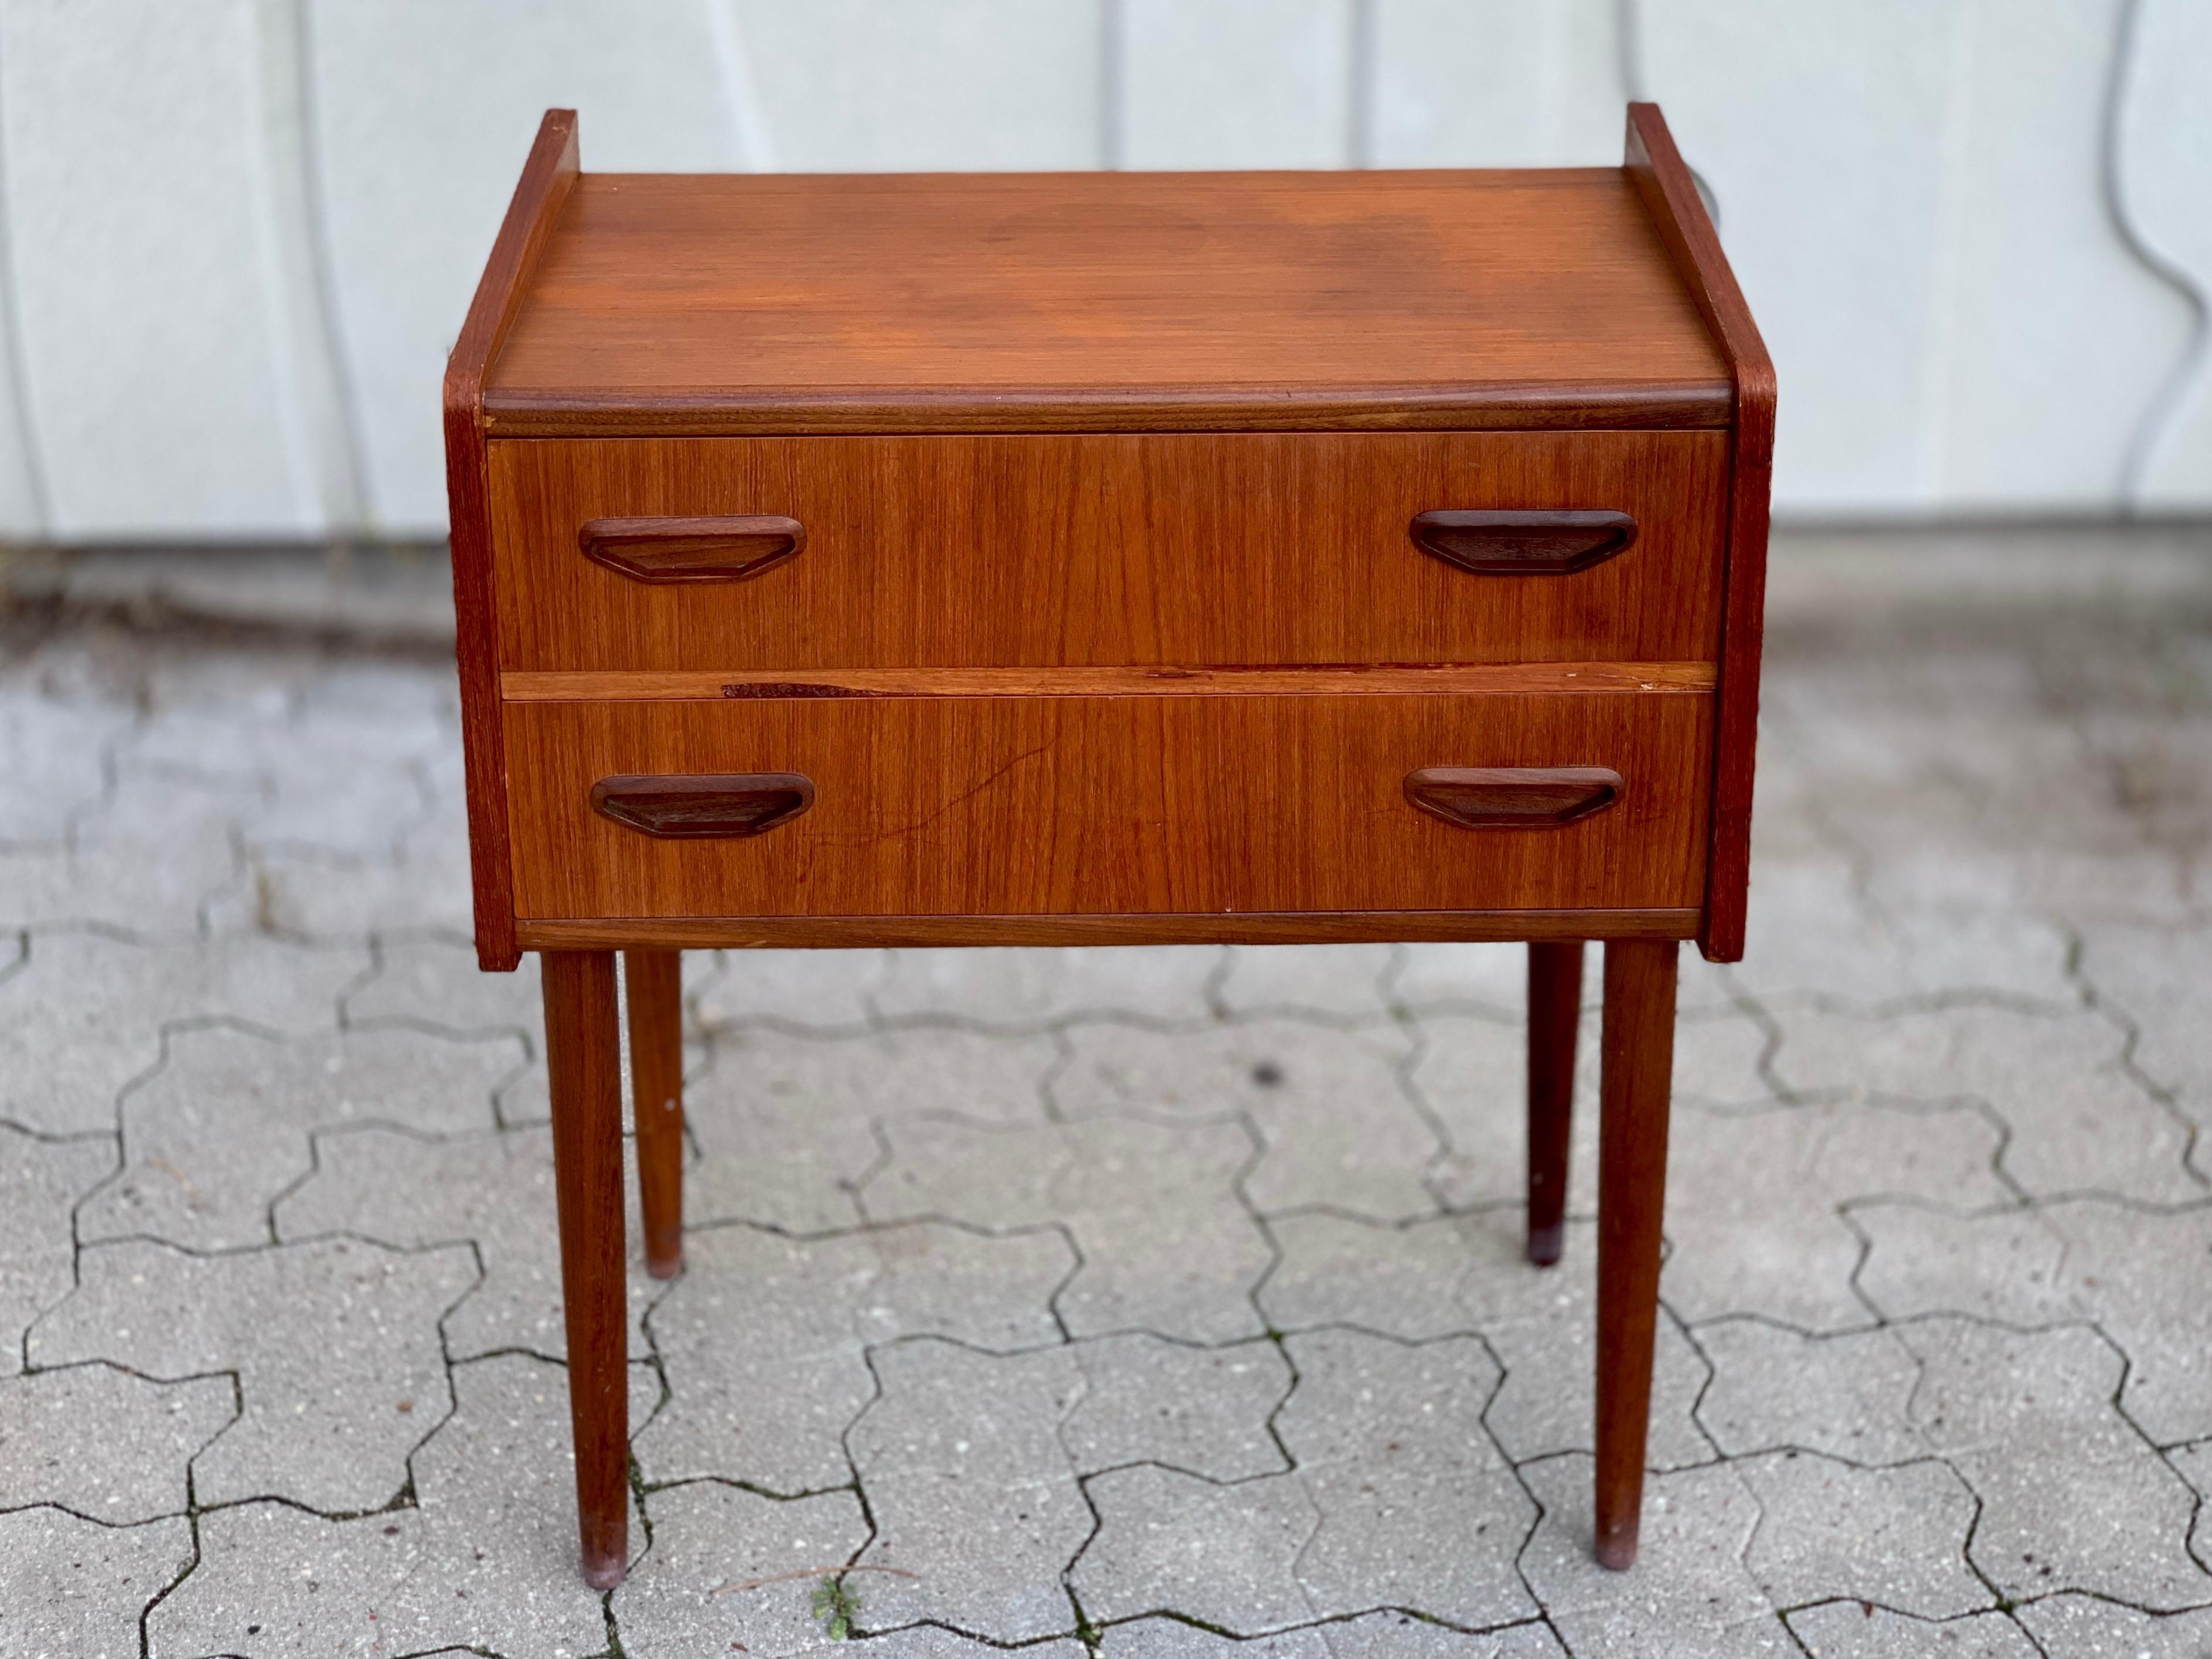 Nightstand / entrance piece featuring two drawers. Manufactured by P Westergaard Møbelfabrik. Denmark, 1960s

Measures: H 67, W 58, D 33 cm.